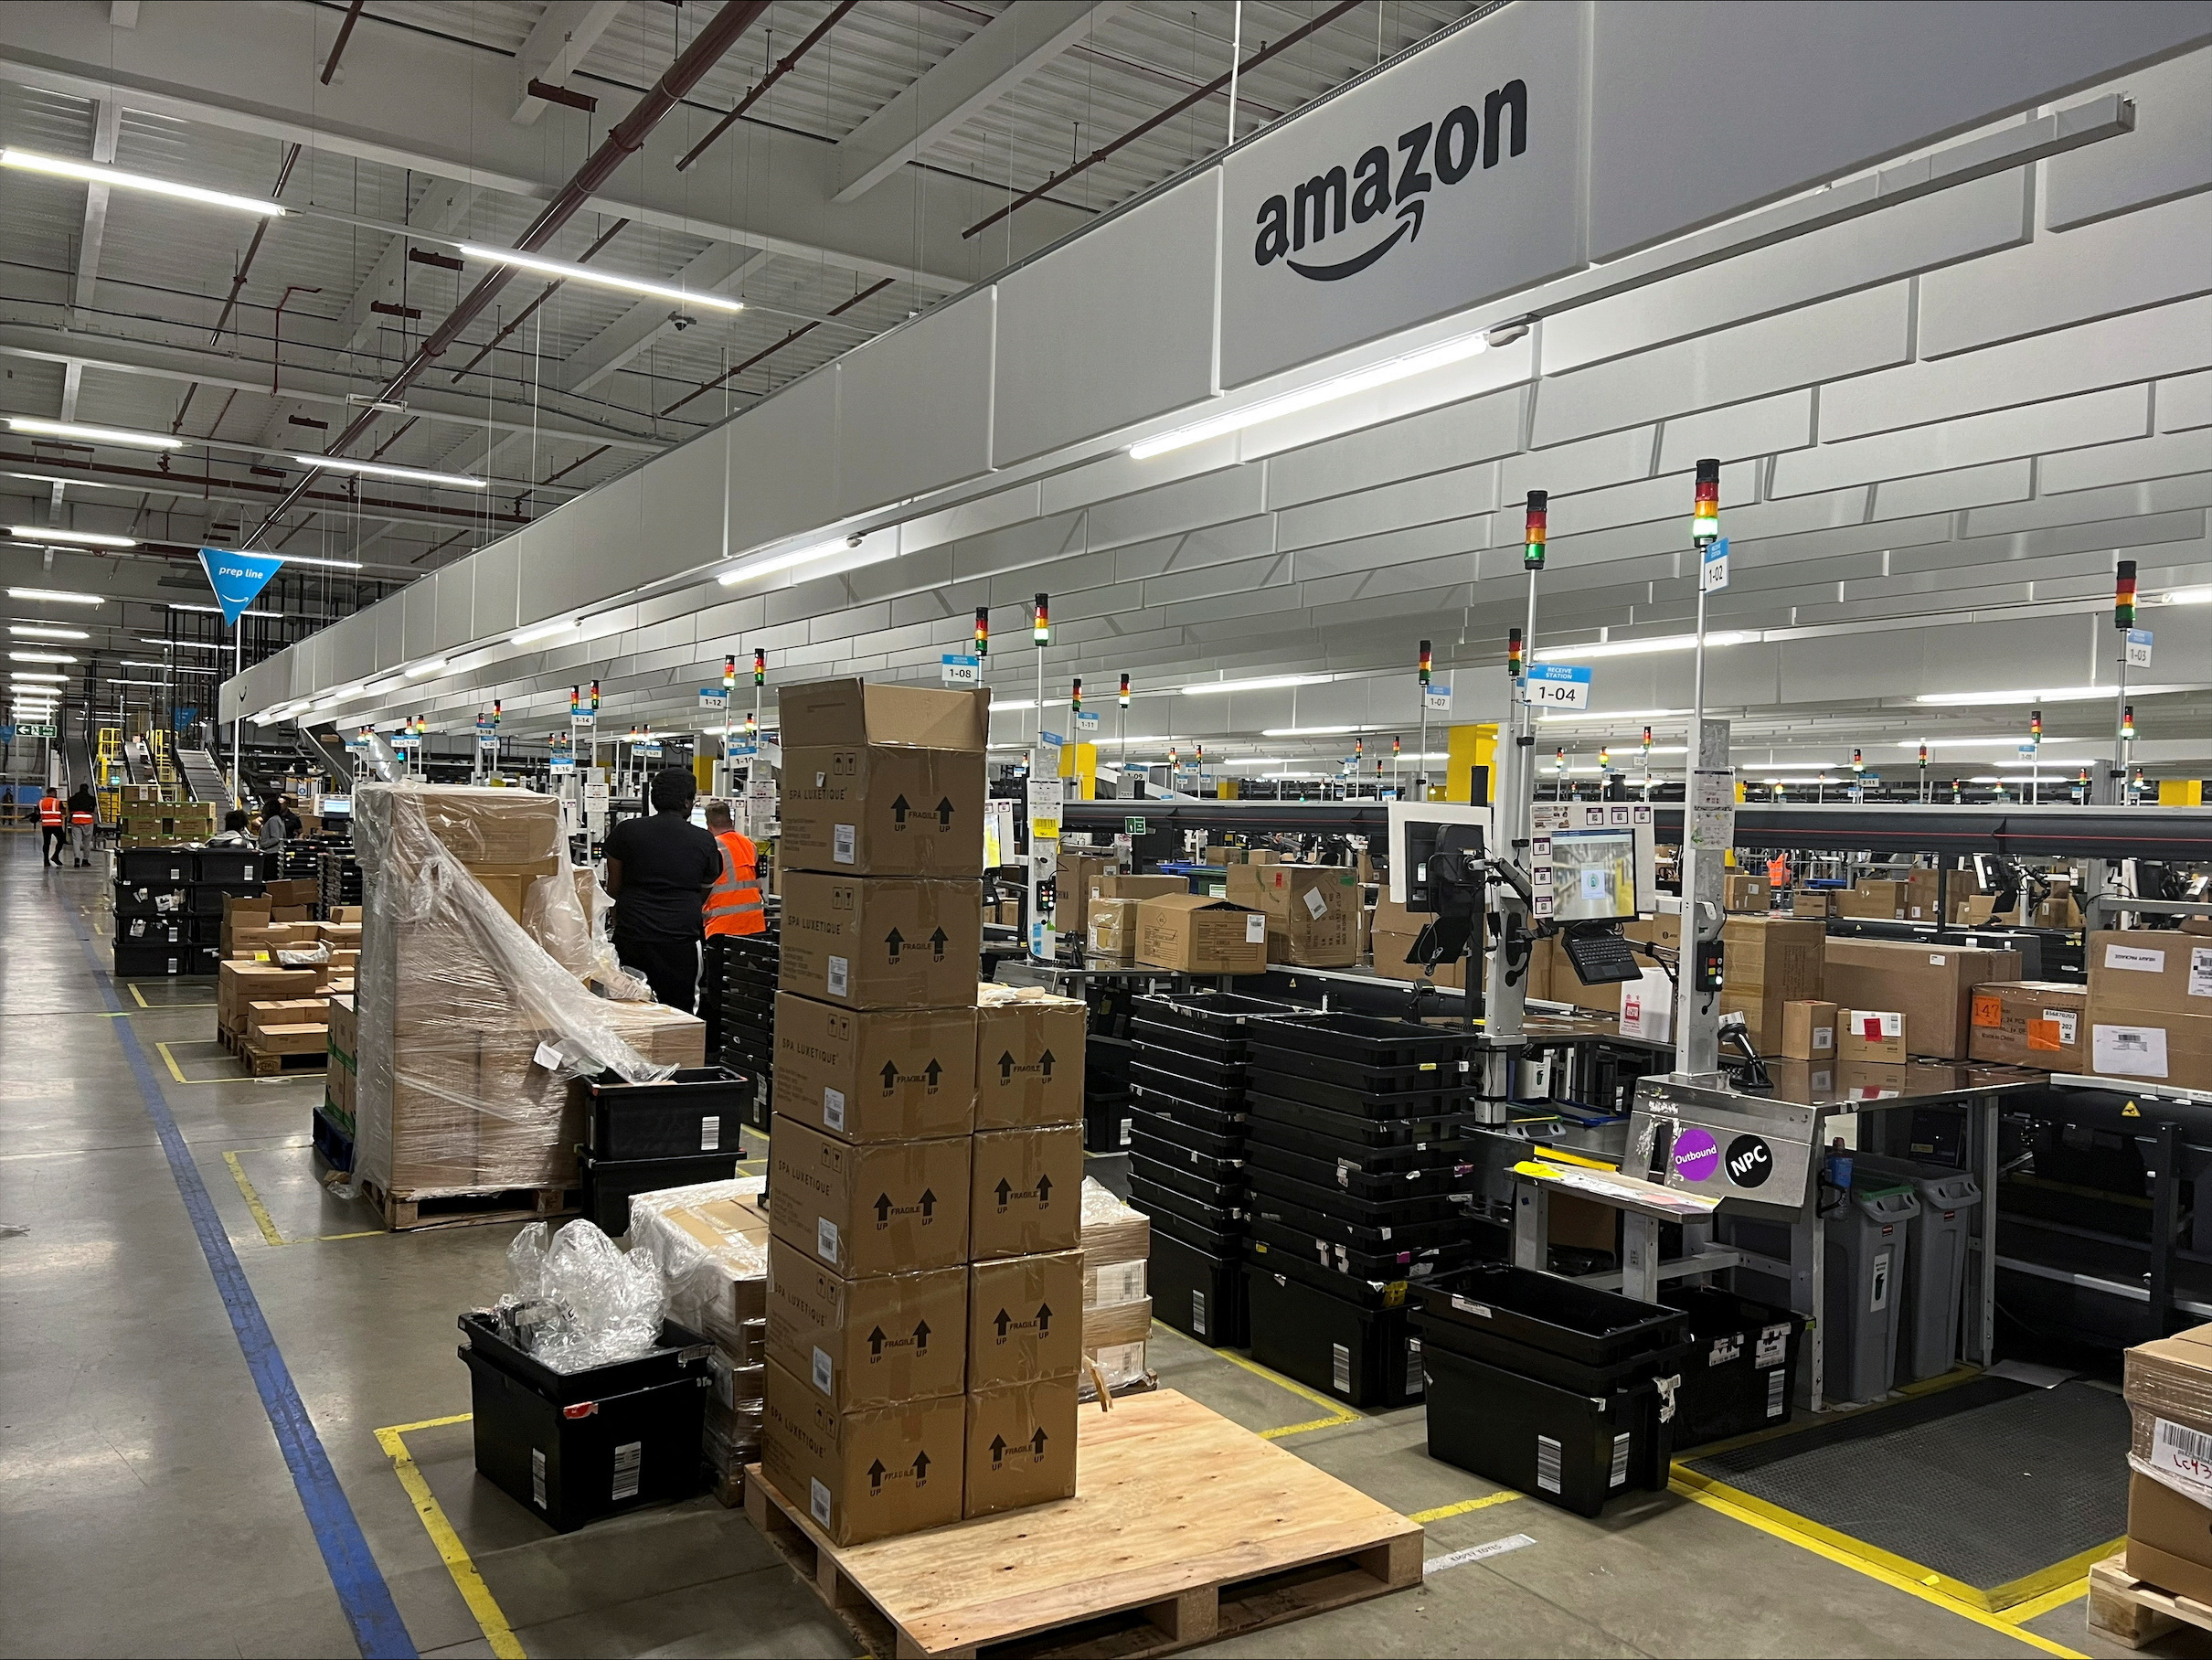 View of an Amazon warehouse in Dartford